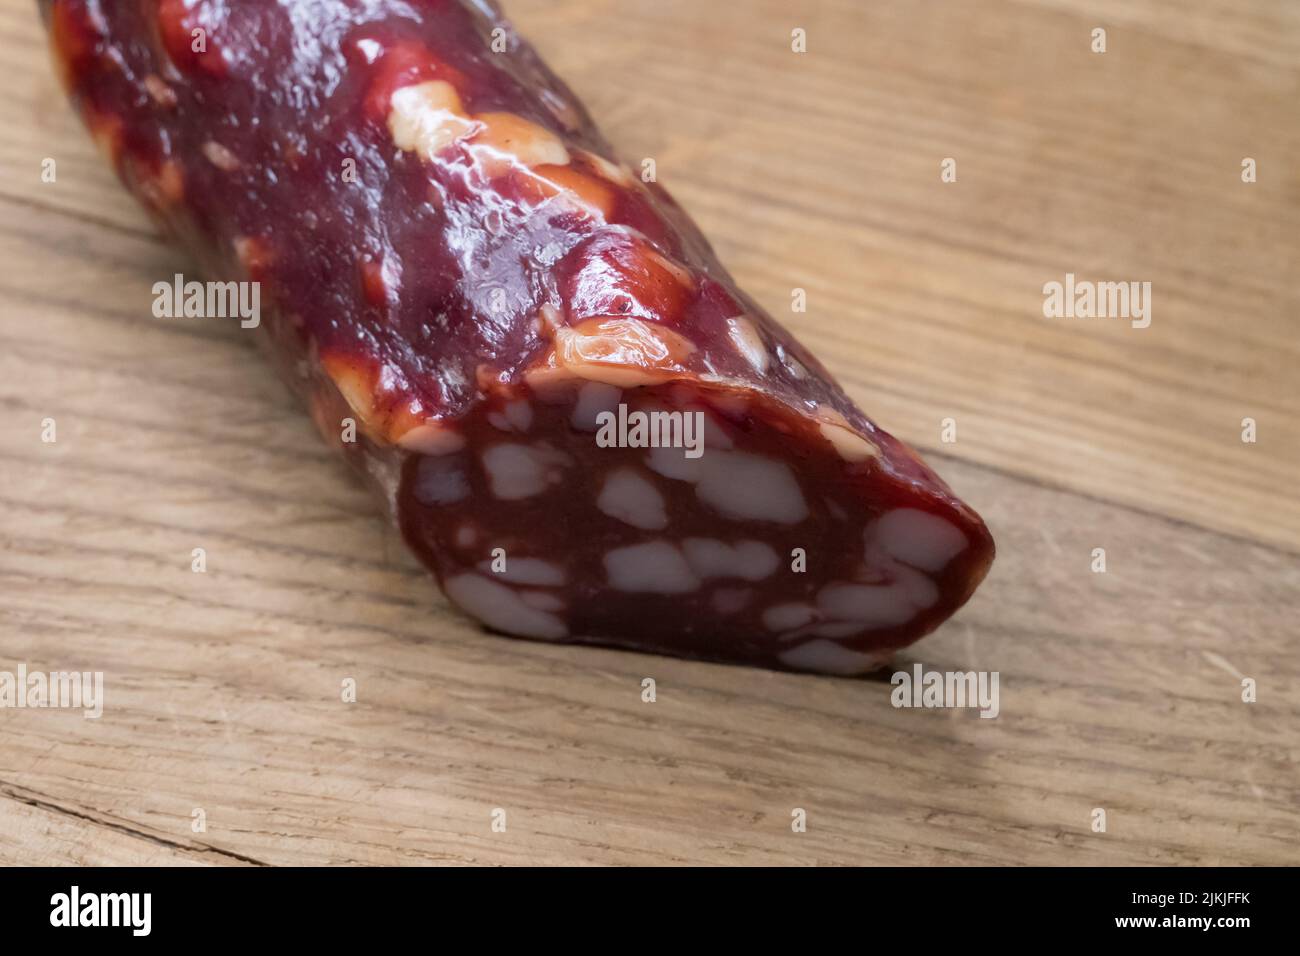 Smoked sausage on a wooden cutting board, food close-up shot. Sausage with a lot of fat. Delicacy dried sausage for food illustration. Tasty sausage o Stock Photo